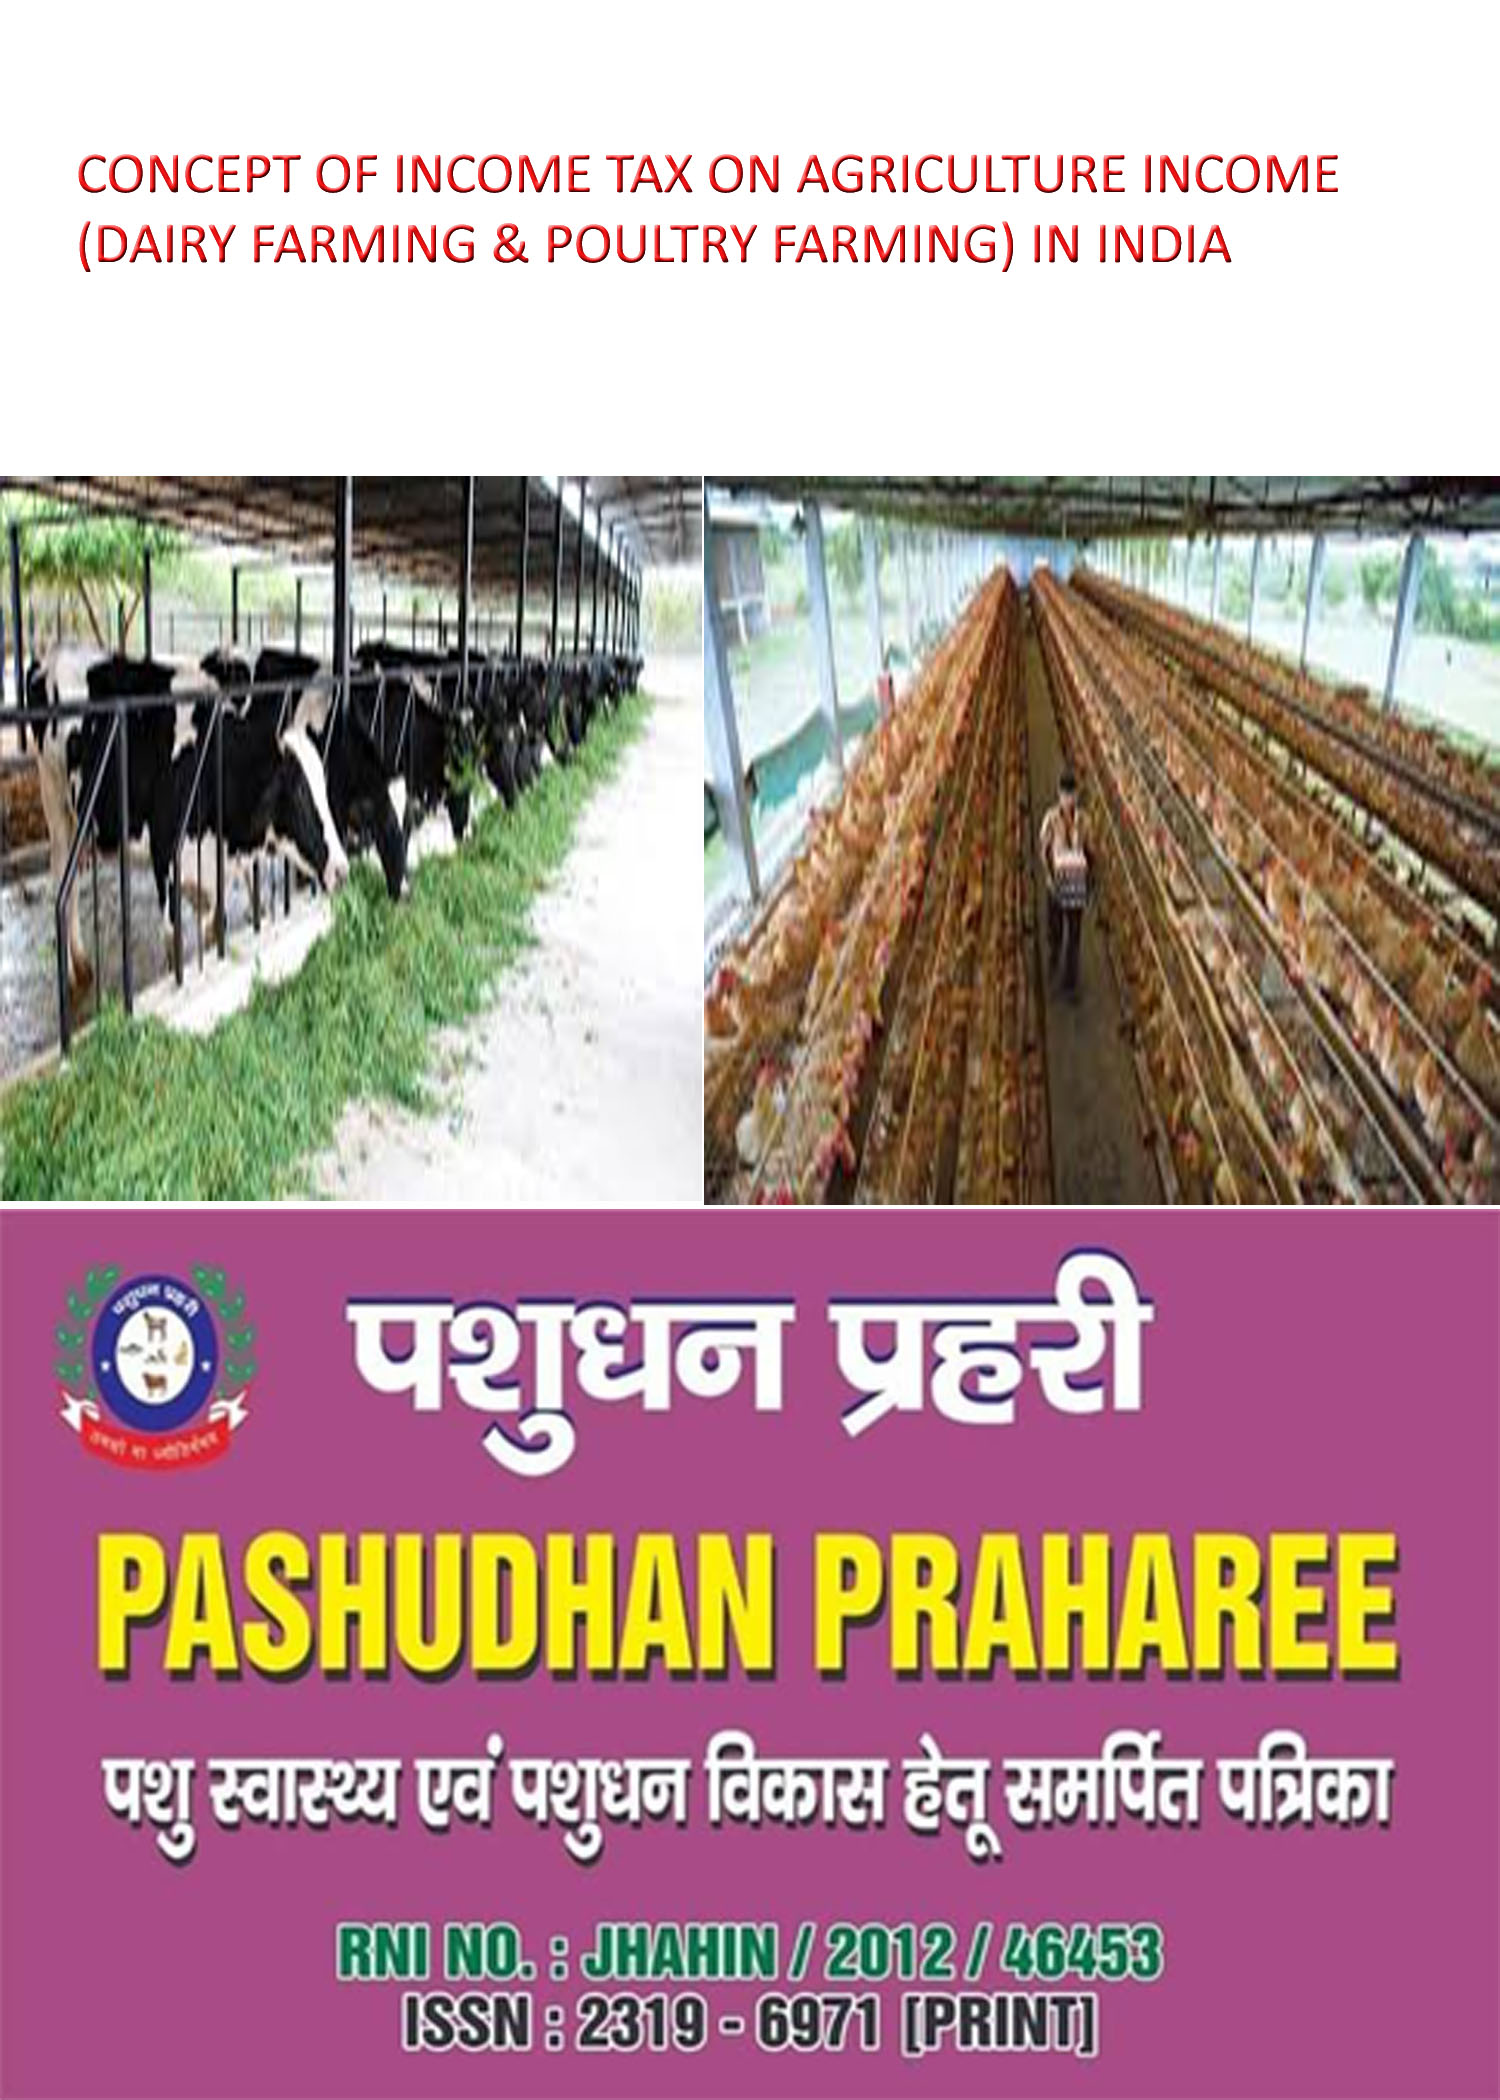 CONCEPT OF INCOME TAX ON AGRICULTURE INCOME (DAIRY FARMING & POULTRY FARMING)  IN INDIA – Pashudhan praharee